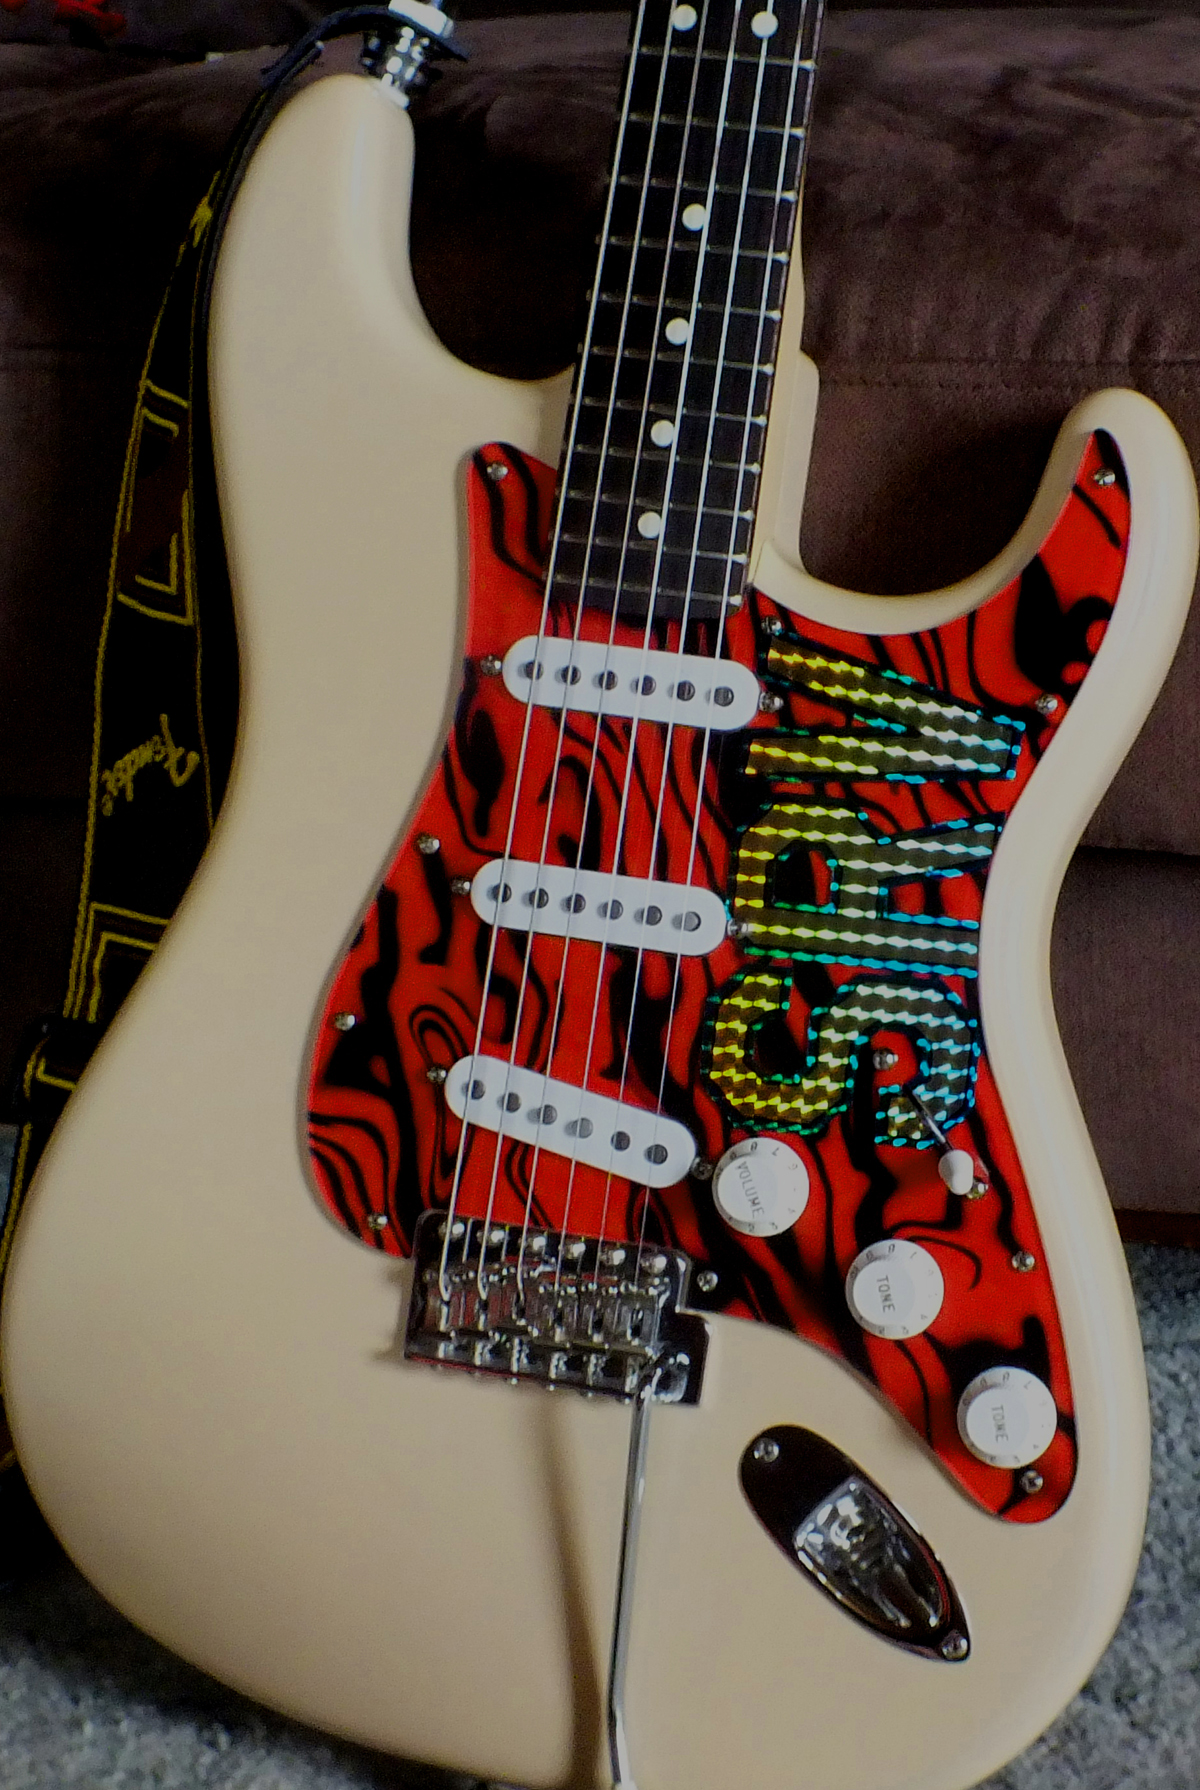 SRV Lenny / Scotch Replica Style Holographic Letters / Decals /Stickers